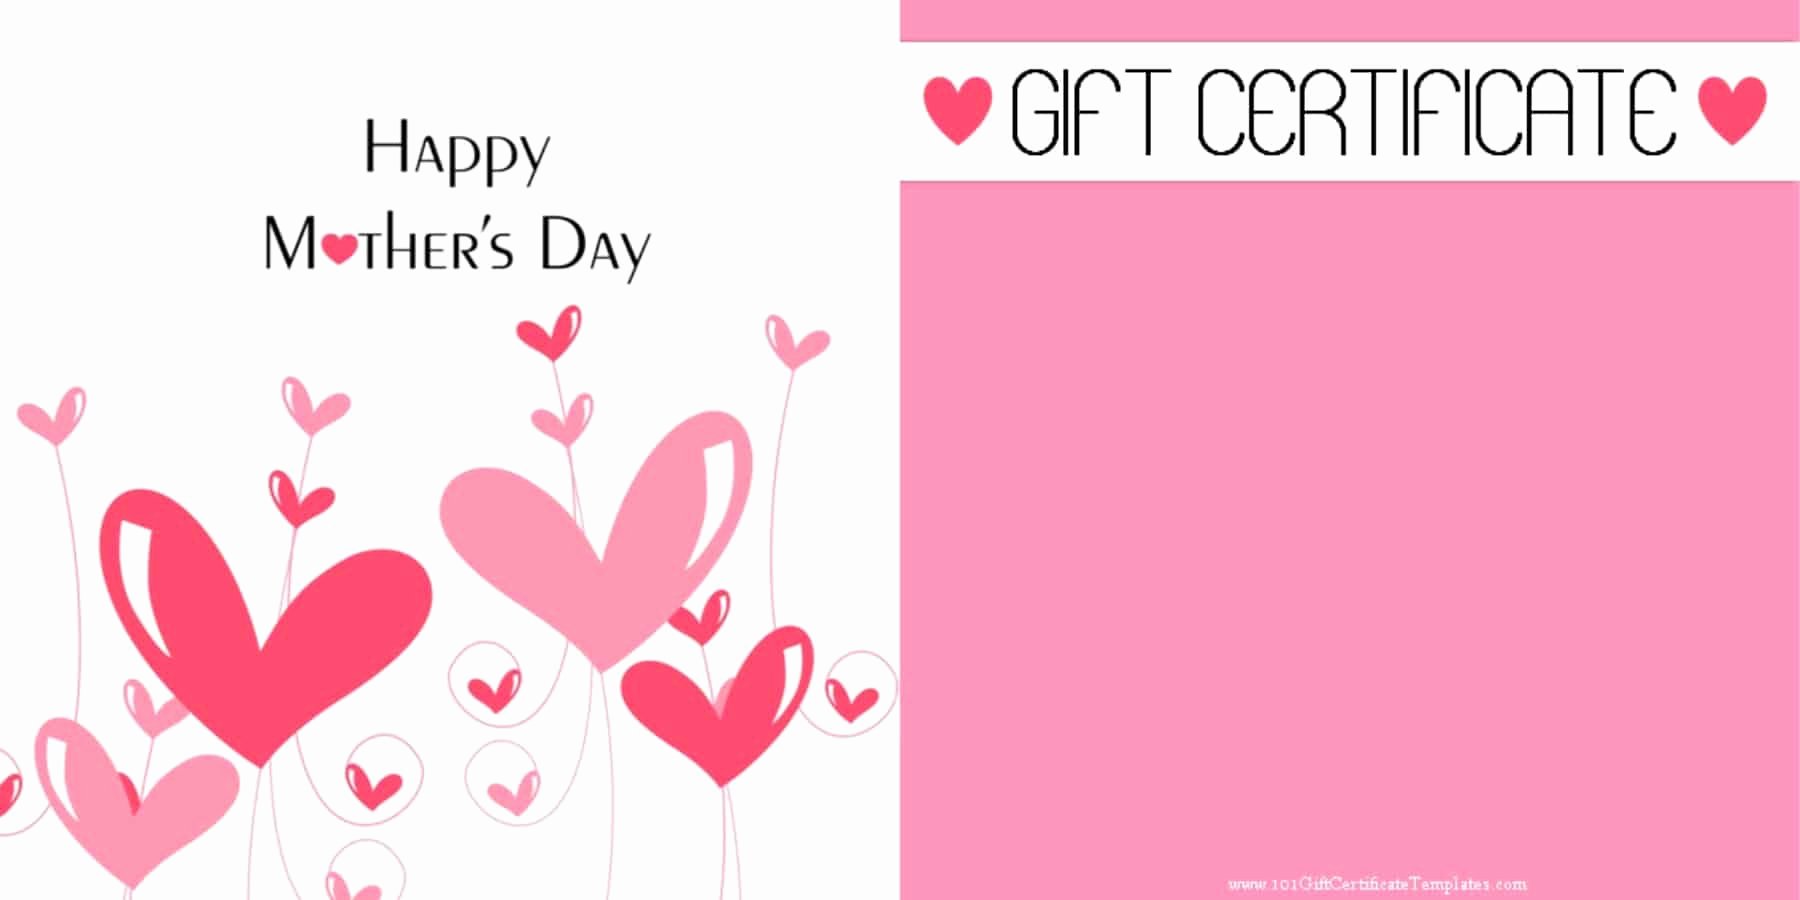 Mothers Day Cards Template Best Of Mother S Day Gift Certificate Templates